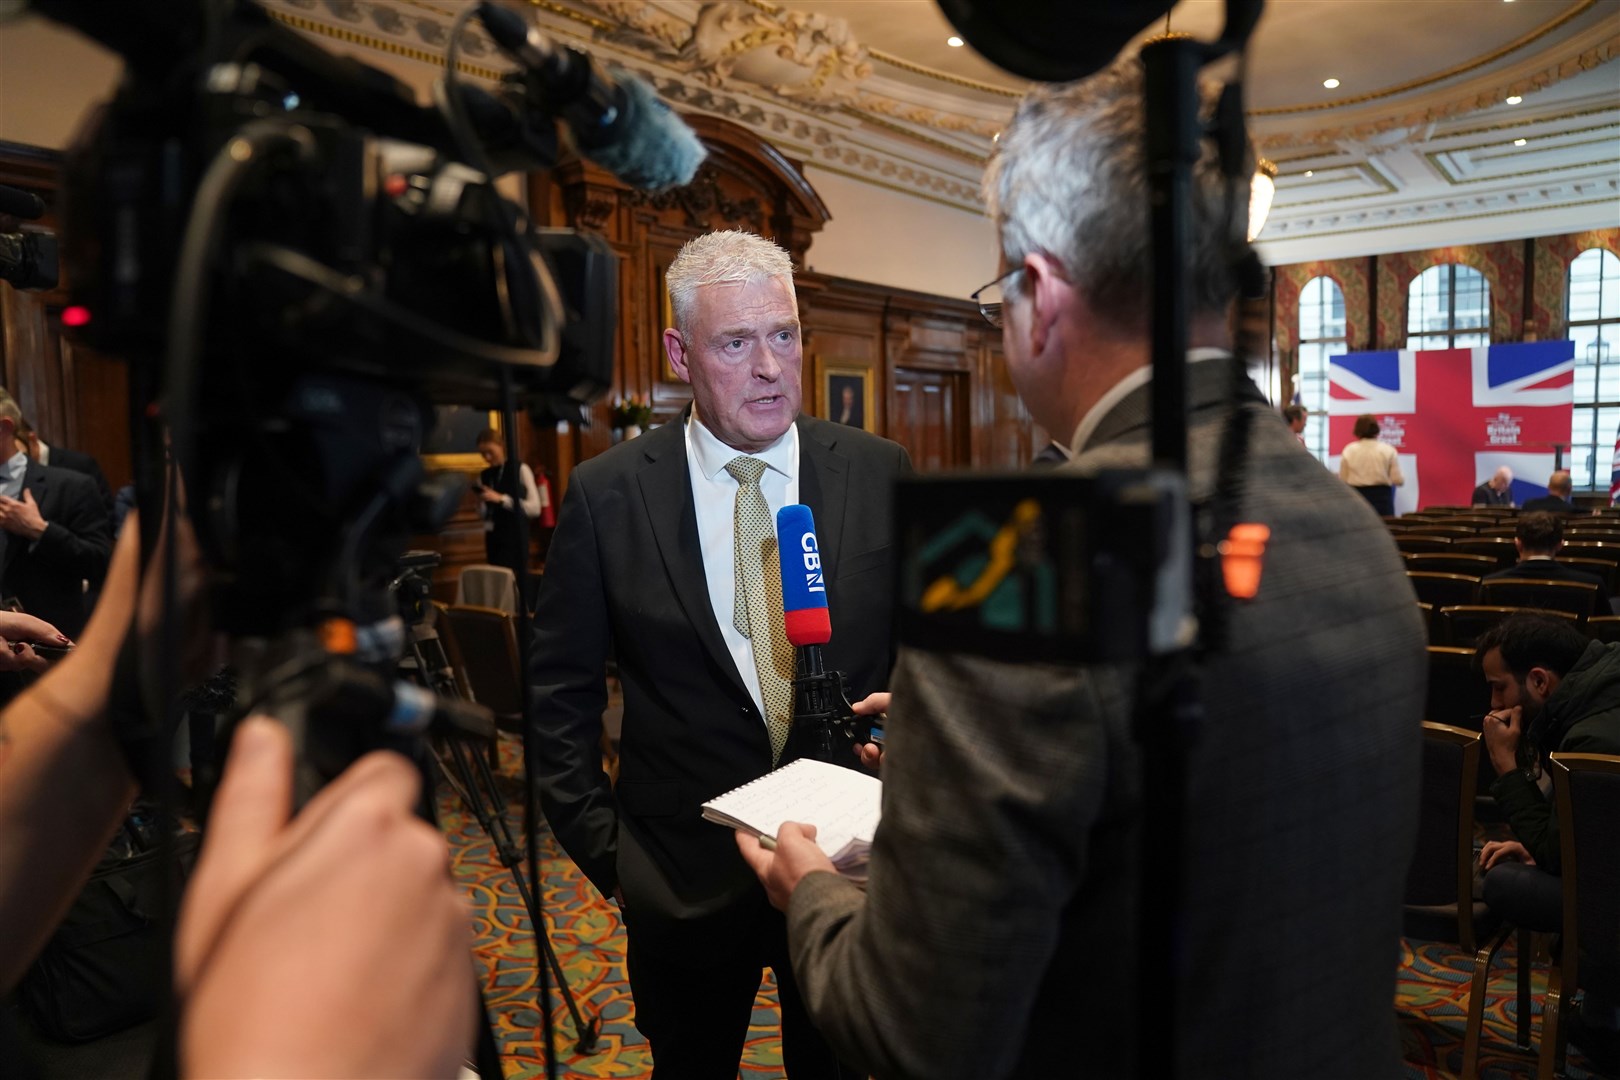 Former Tory deputy chairman Lee Anderson doing media interviews at the Institute for Civil Engineers in central London following the announcement that he is defecting to Reform UK (Lucy North/PA)